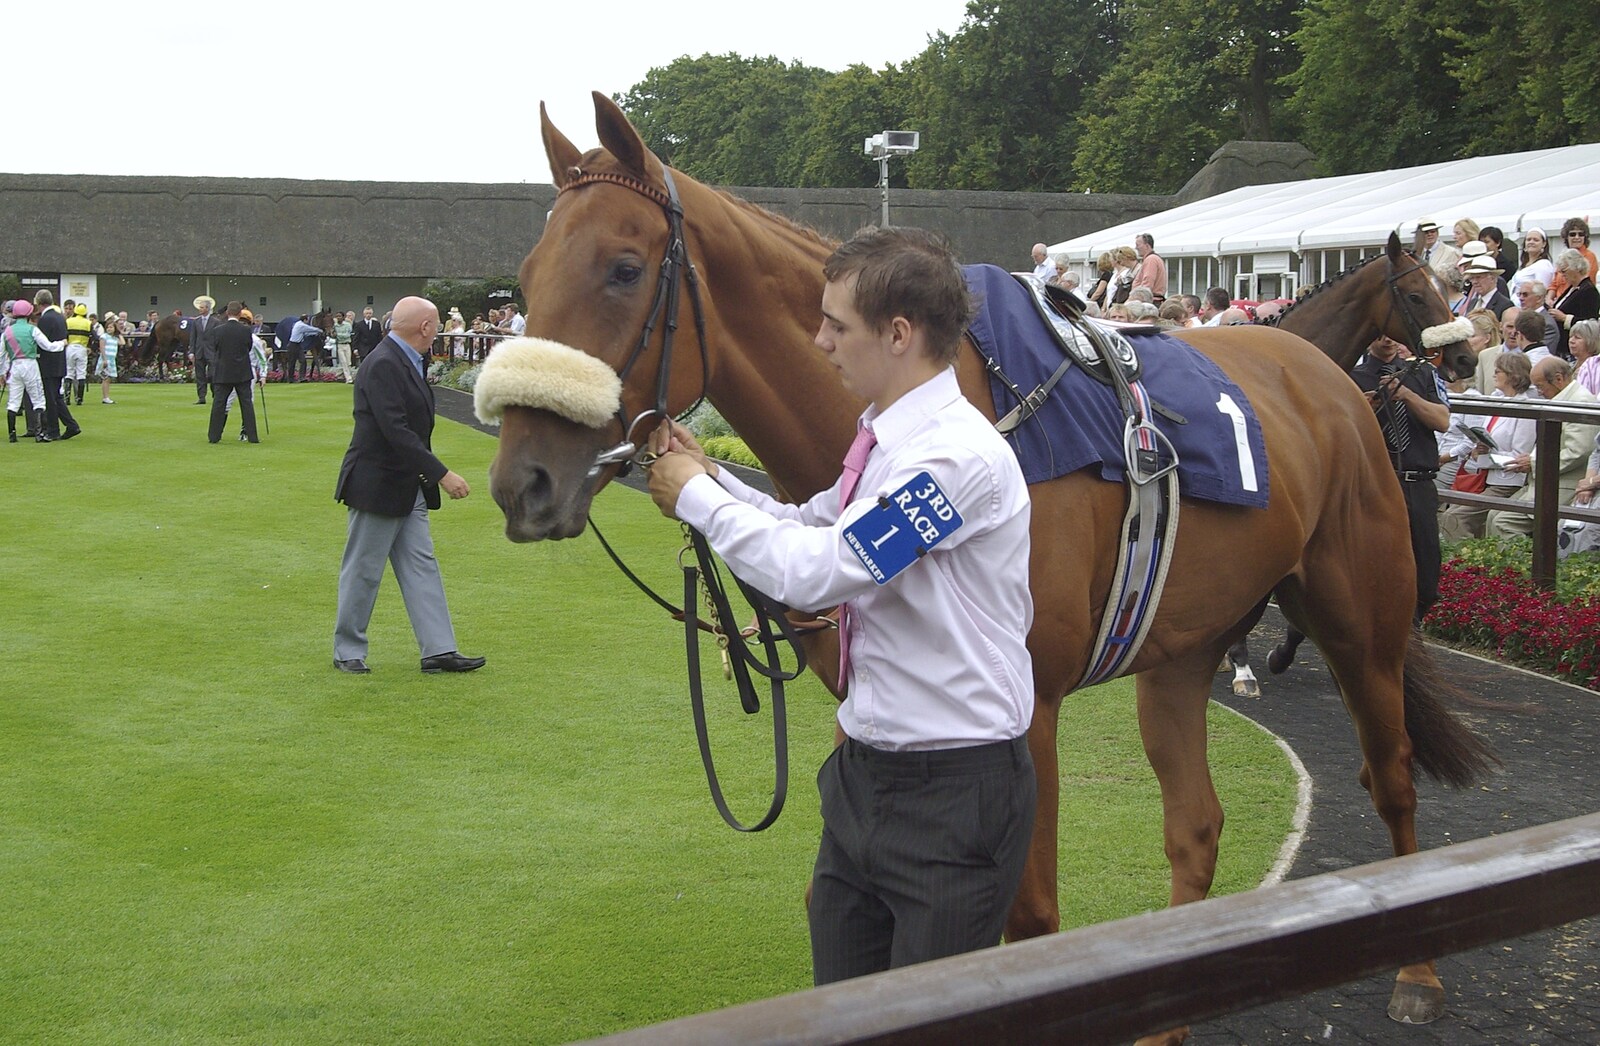 A Day At The Races, Newmarket, Suffolk - 23rd August 2008: A horse walks around the parade ring